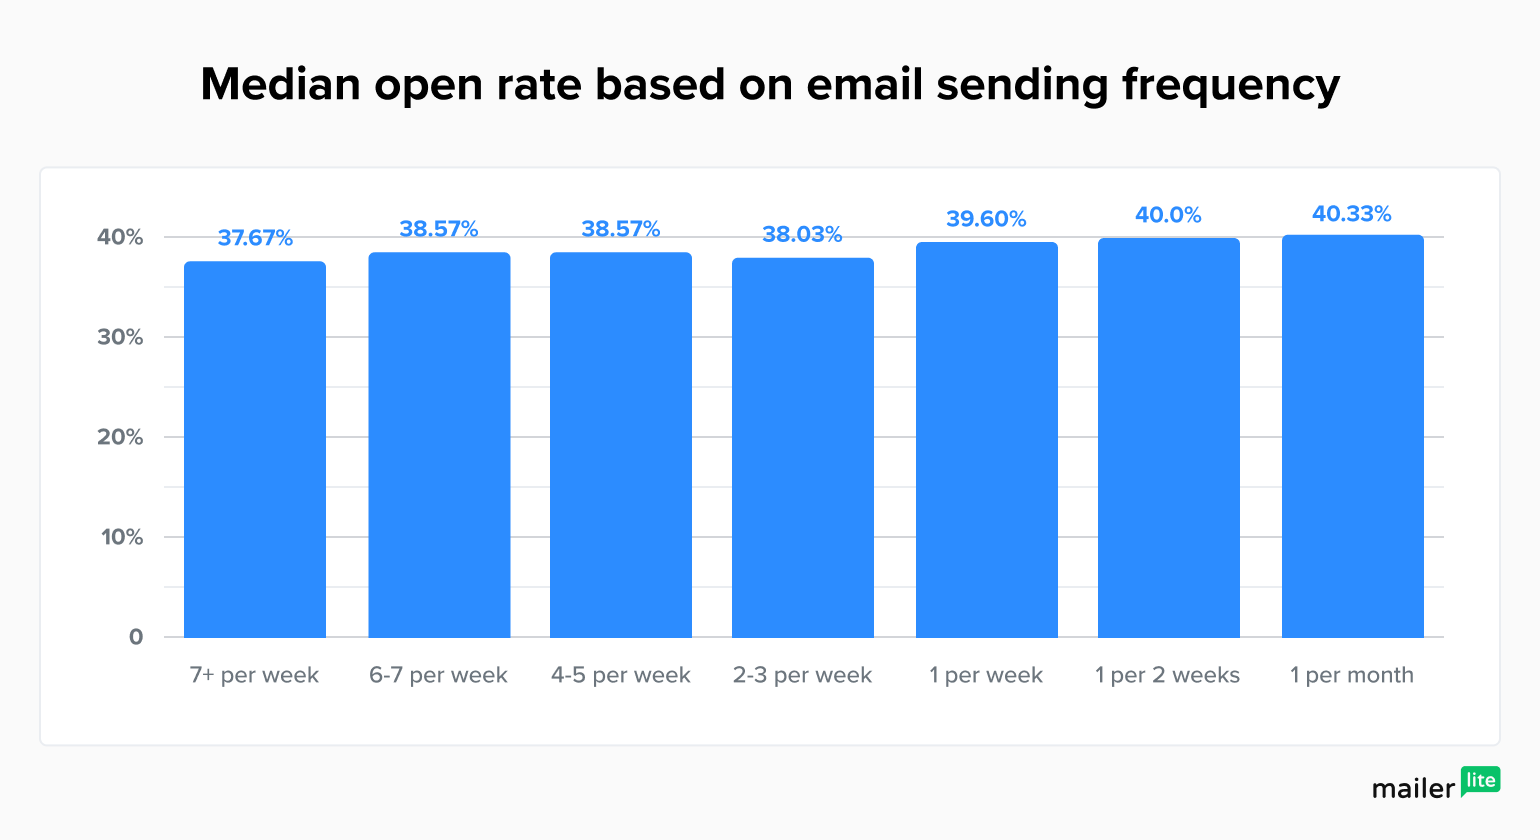 median open rate based on email sending frequency chart - MailerLite